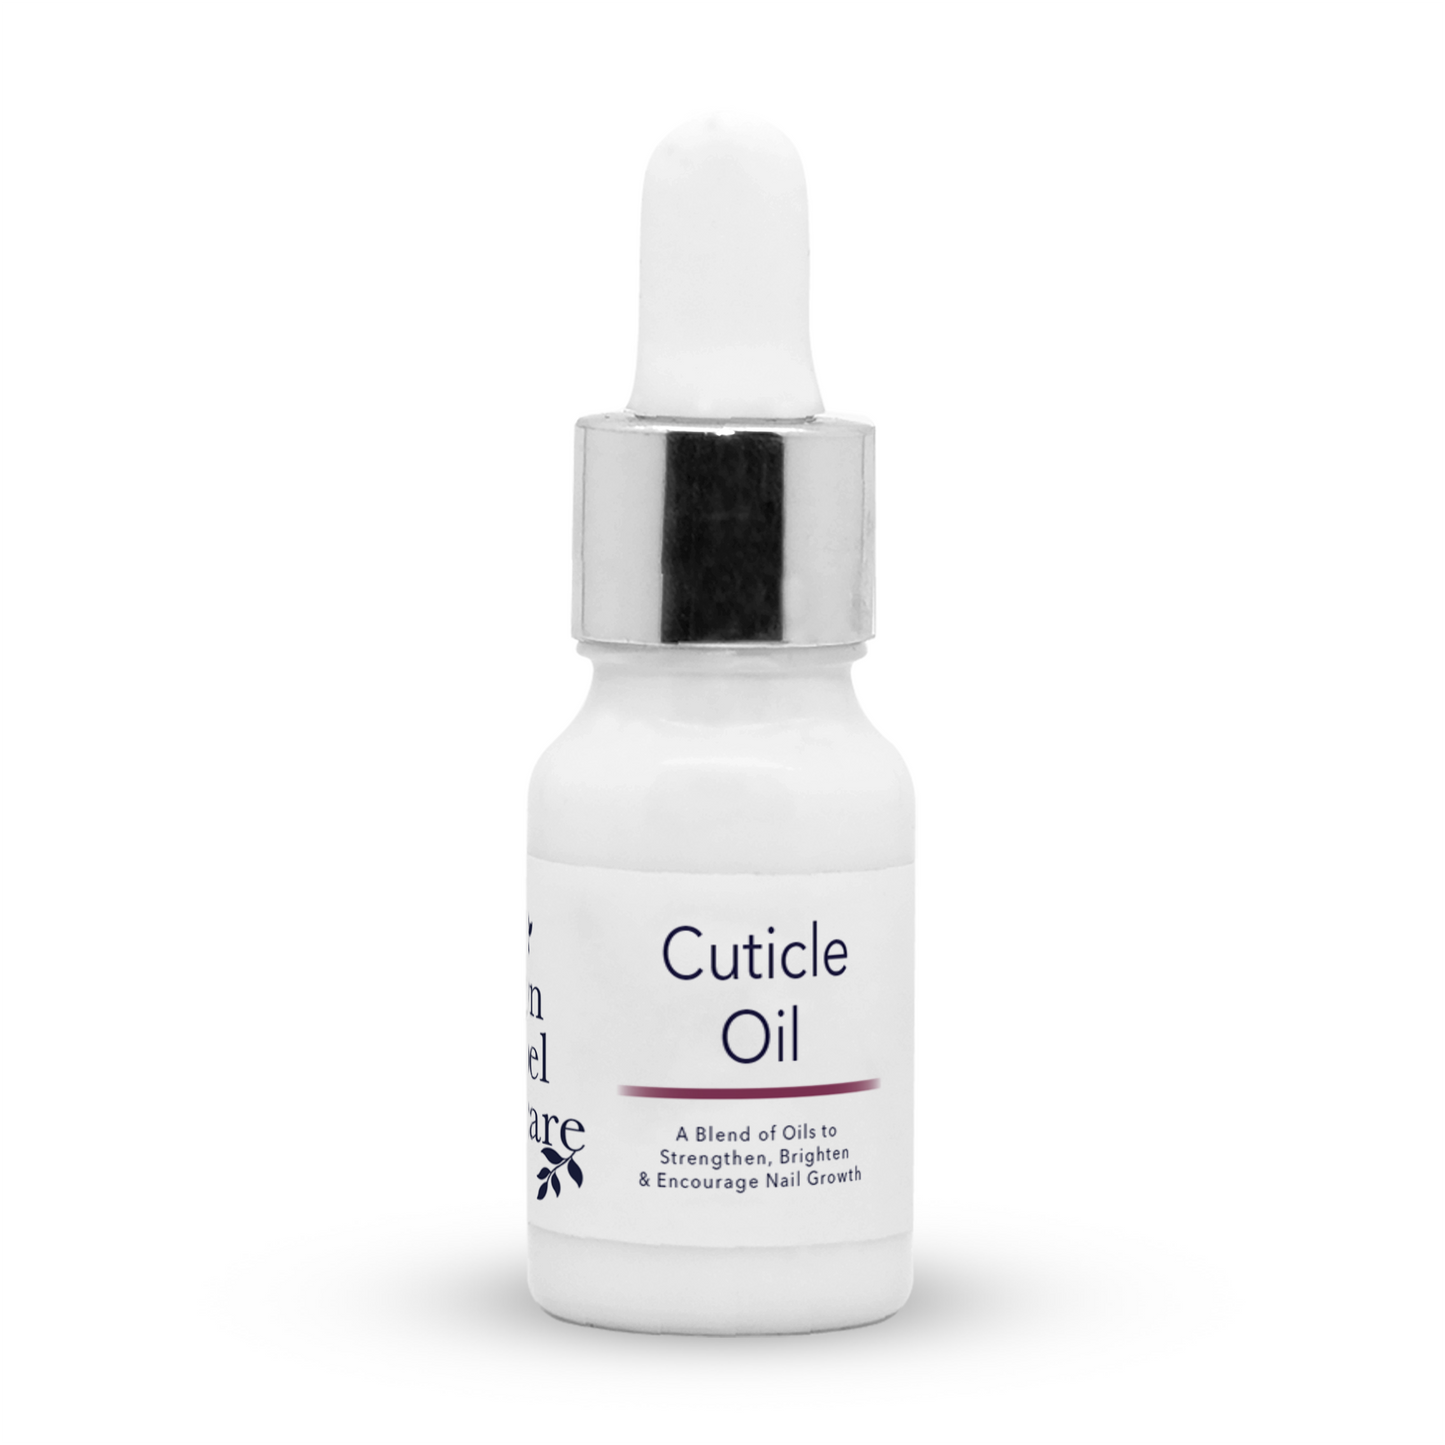 LUXURY CUTICLE OIL | OWN LABEL